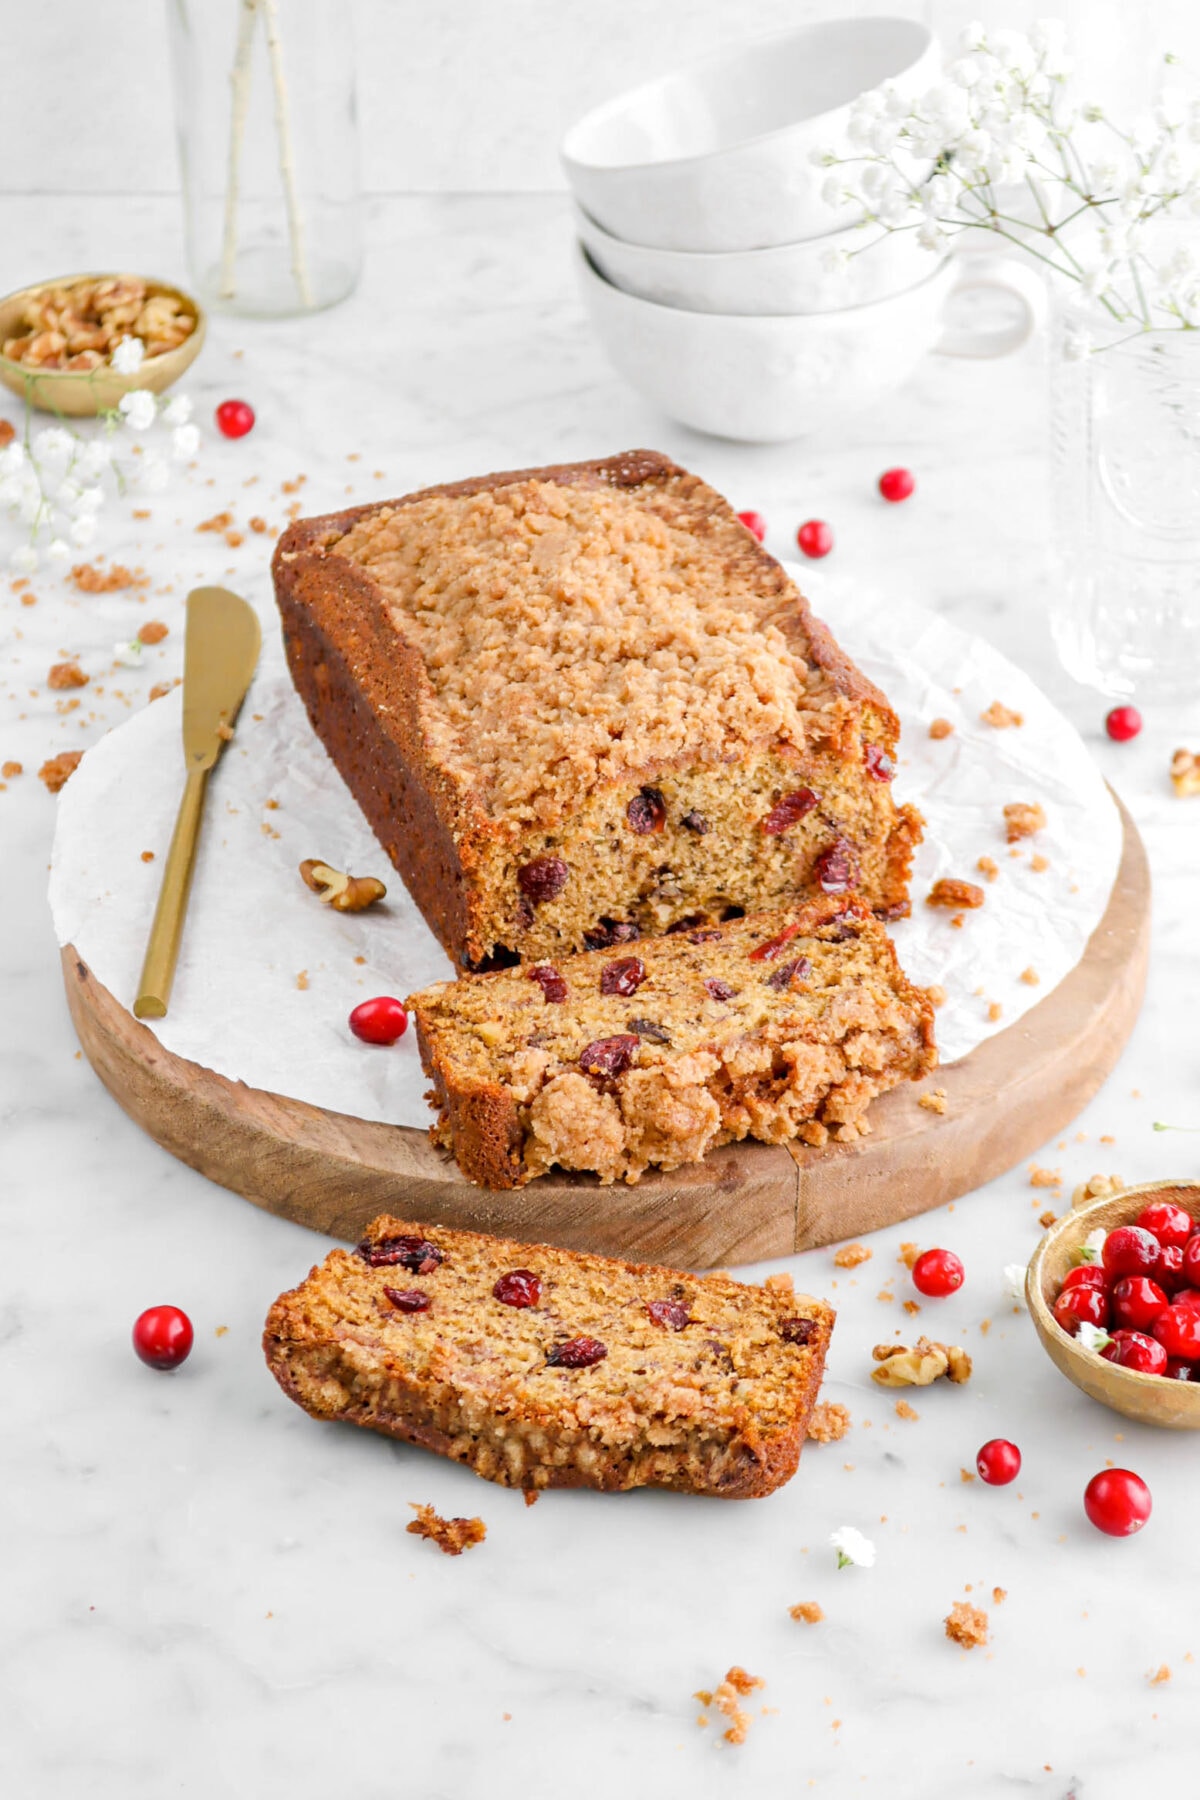 angled shot of banana bread on wood board with two slices laying in front, a gold knife beside, bowl of cranberries in front, and a bowl of walnuts behind.